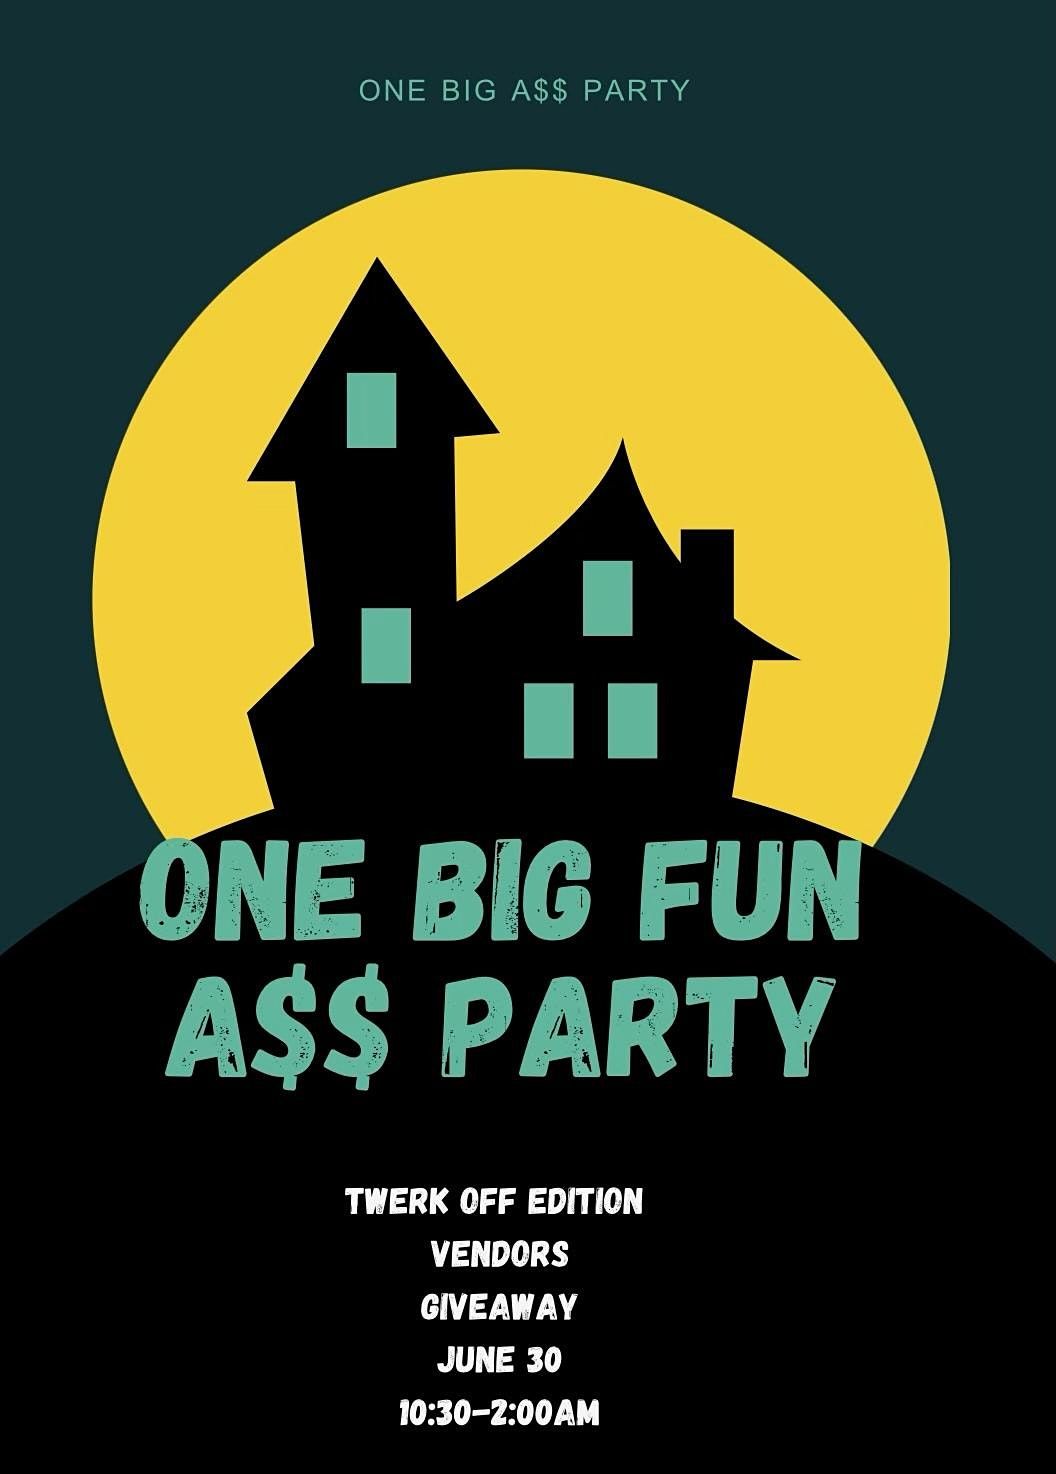 One Big A$$ Party